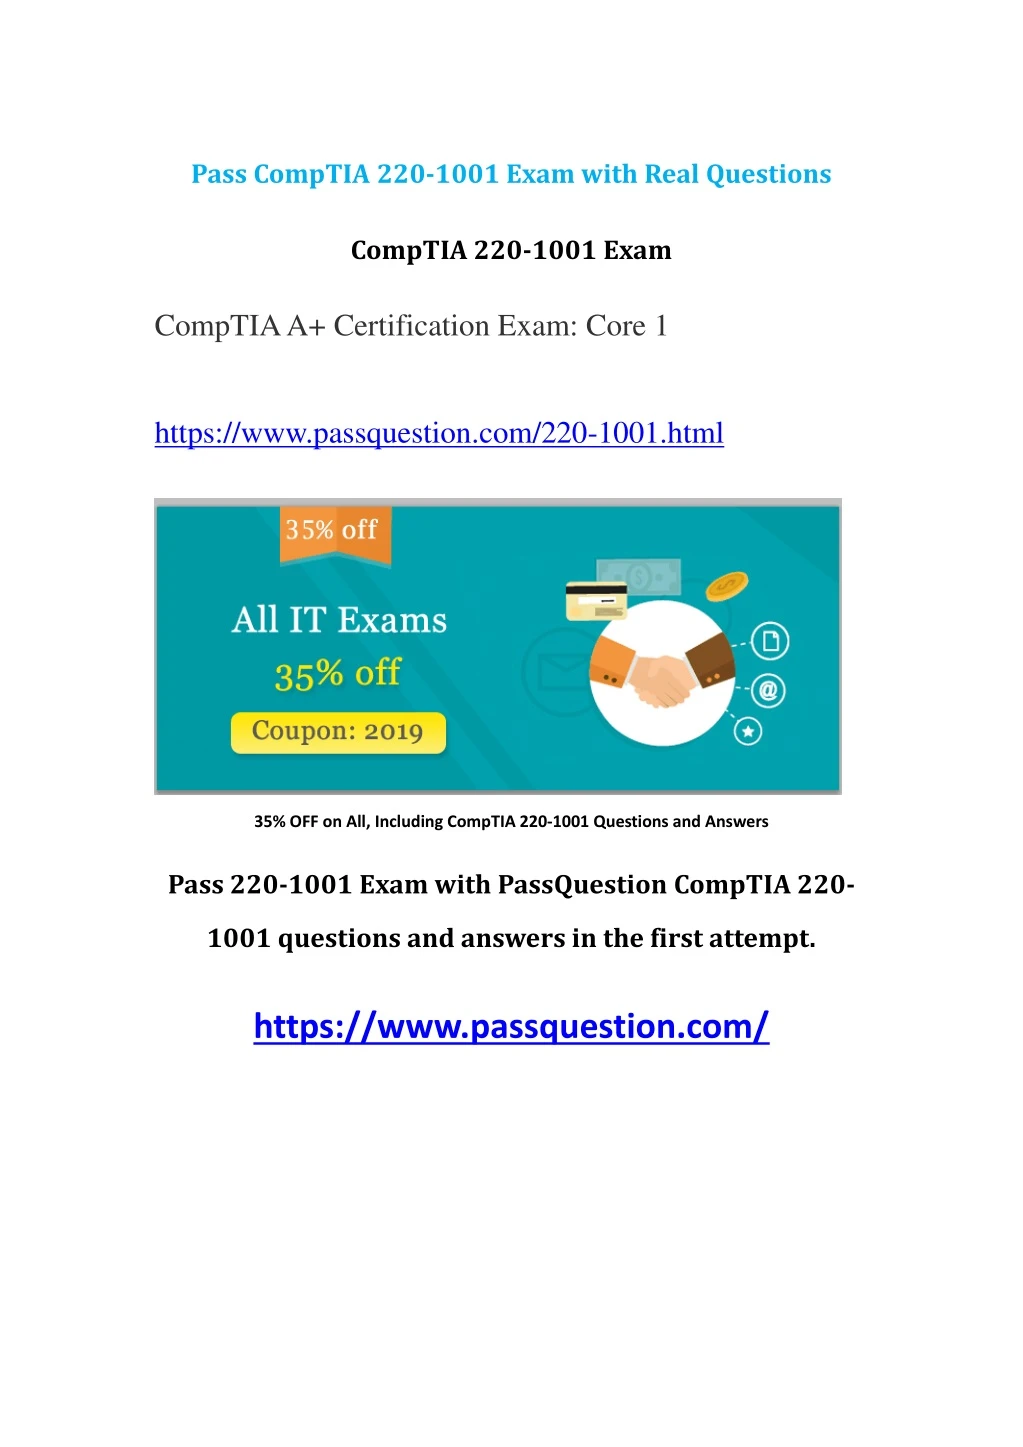 pass comptia 220 1001 exam with real questions